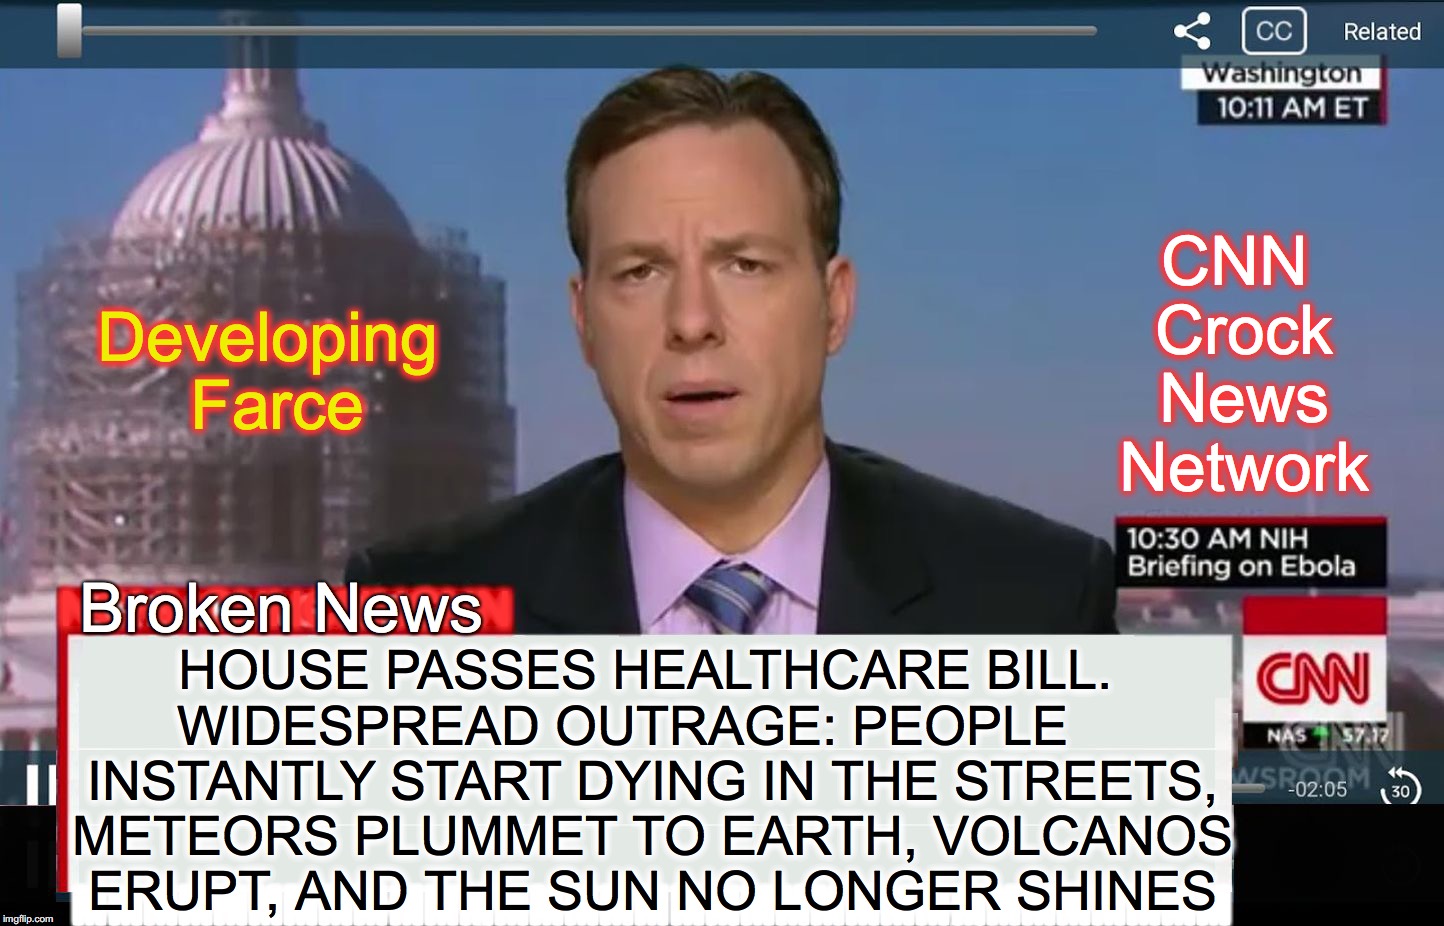 Scare tactic much? | CNN Crock News Network; Developing Farce; HOUSE PASSES HEALTHCARE BILL. WIDESPREAD OUTRAGE: PEOPLE     INSTANTLY START DYING IN THE STREETS, METEORS PLUMMET TO EARTH, VOLCANOS ERUPT, AND THE SUN NO LONGER SHINES; Broken News; NCNNCNNCNNCNN | image tagged in cnn breaking news template | made w/ Imgflip meme maker